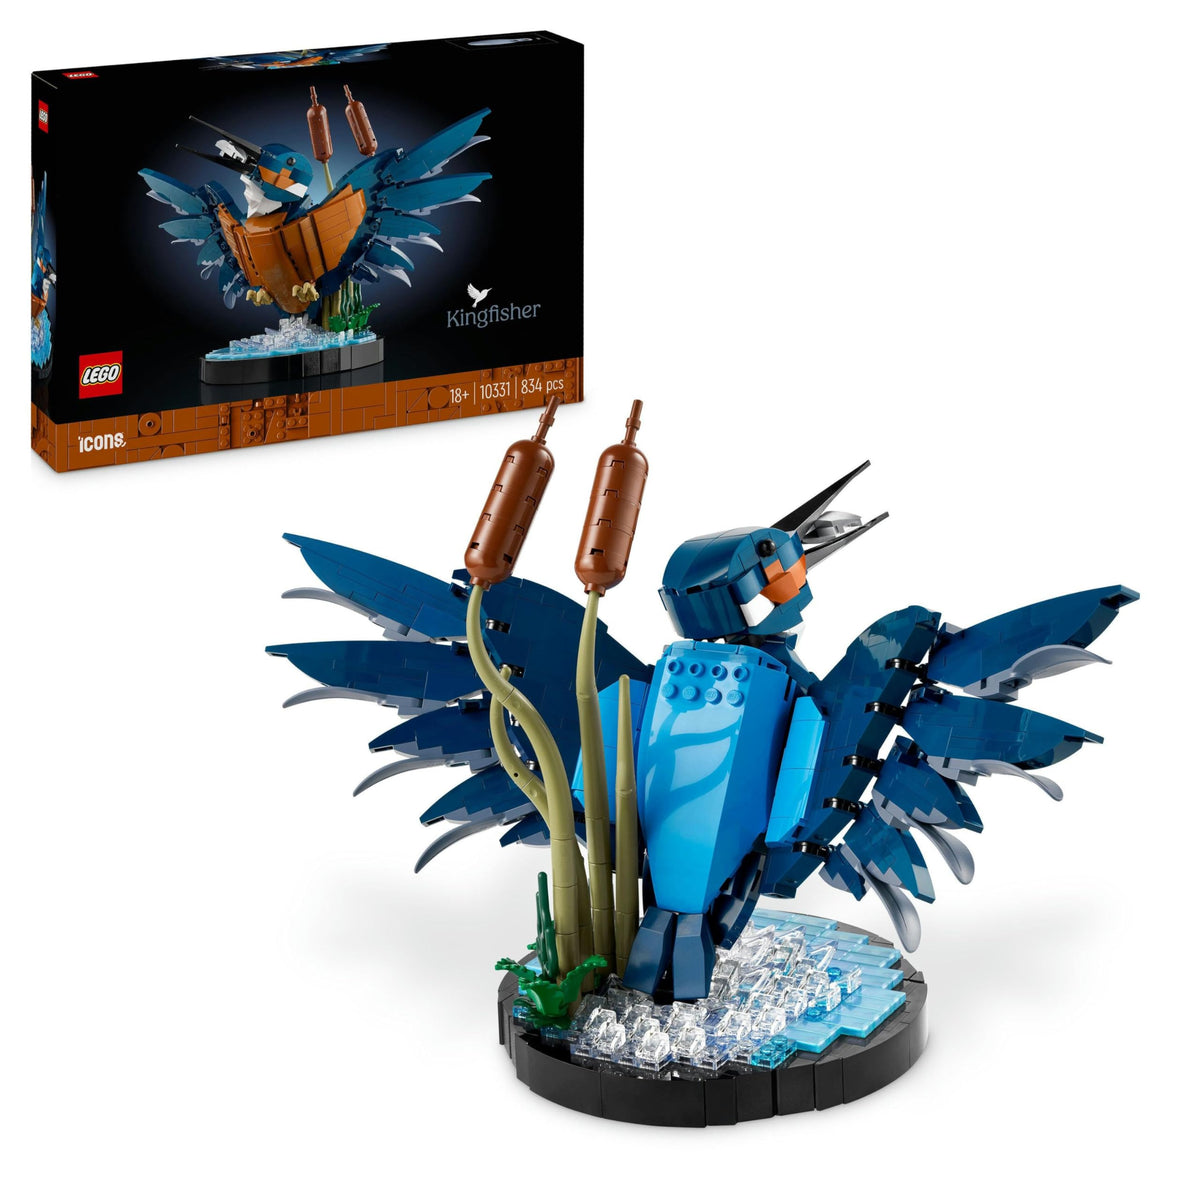 LEGO Icons Kingfisher Bird Set, Model Building Kit for Adults to Build with Water Setting Display Stand, Great Home and Office Desk Décor, Valentine's Day Gifts for Women, Men, Her or Him, 10331